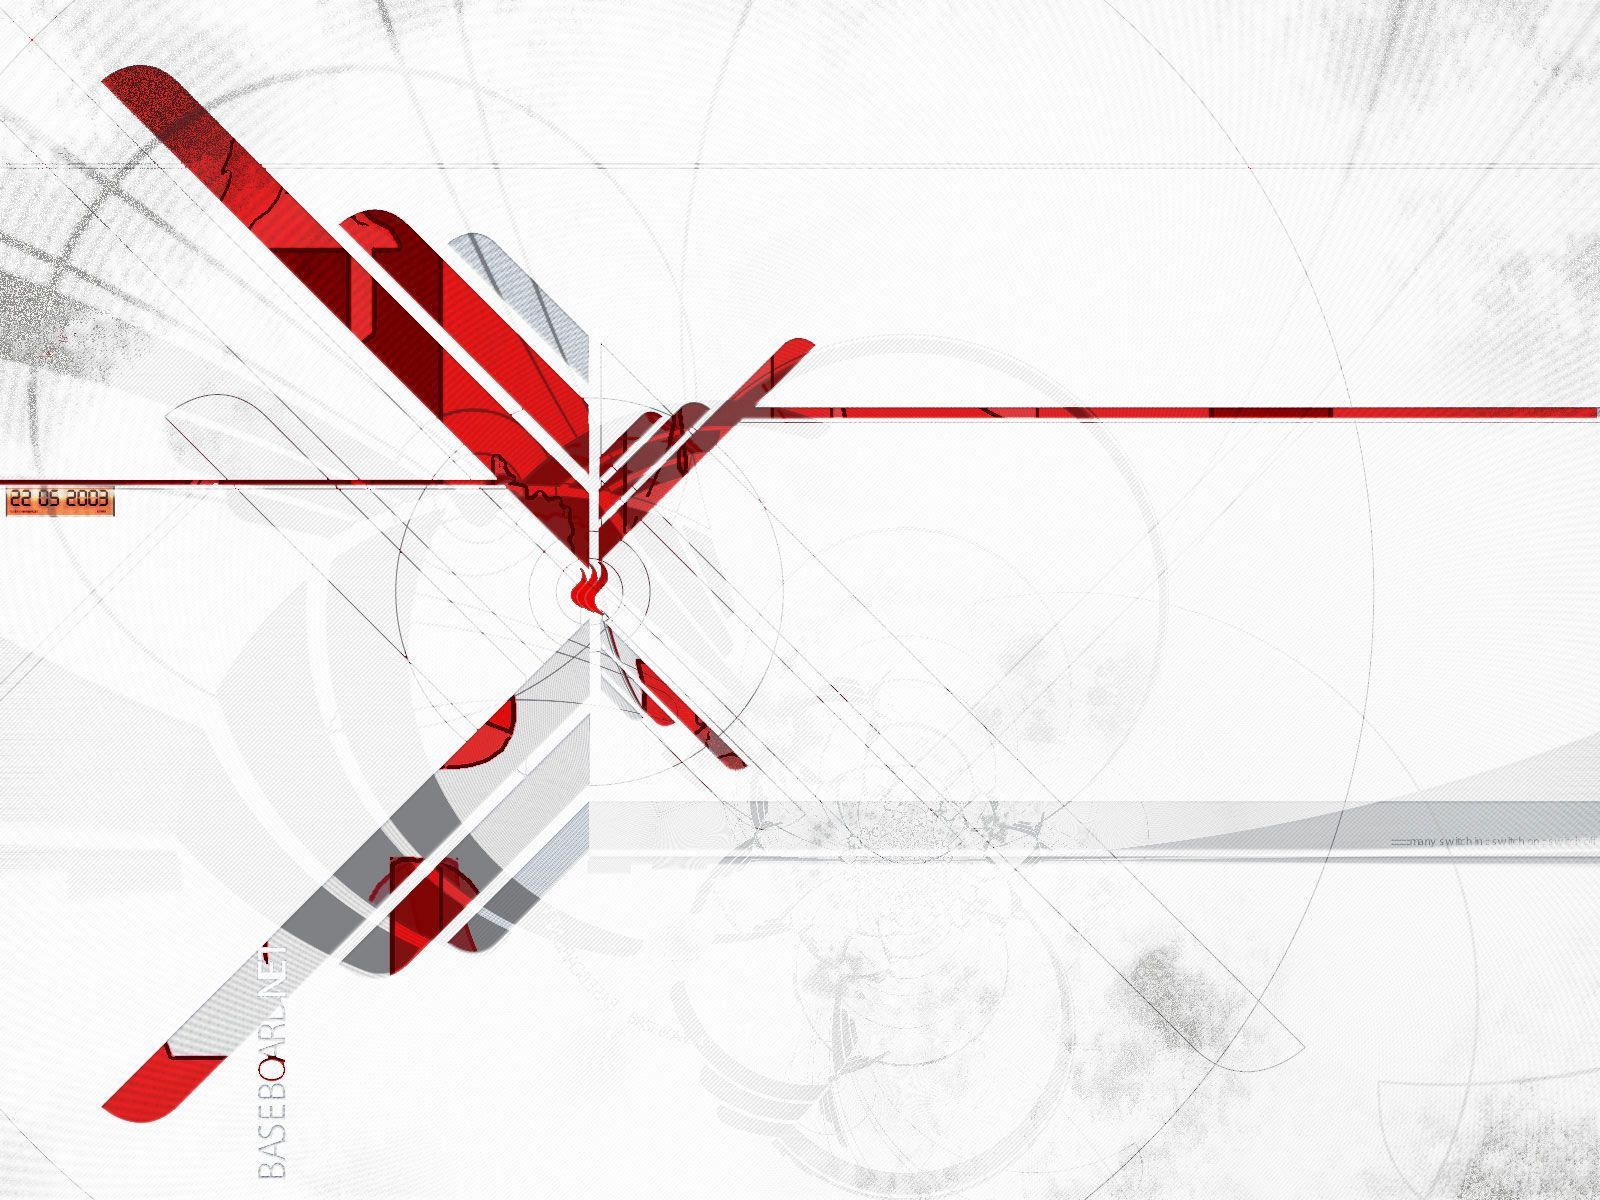 4K Red White Abstract Wallpapers